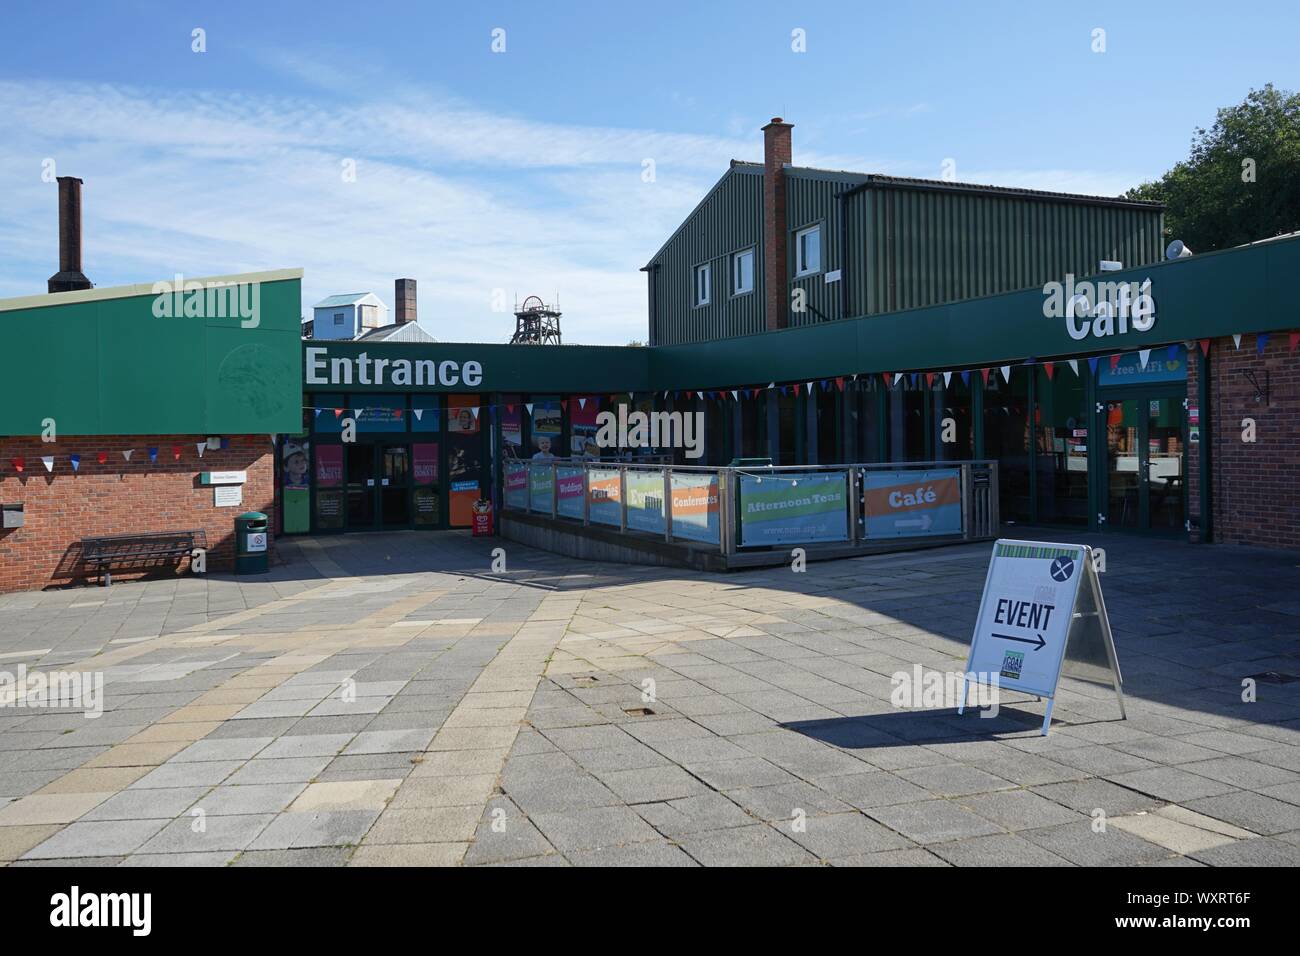 The entrance to the museum and cafe at the National coal minning Museum for england in Walkfield Yorkshire England Stock Photo